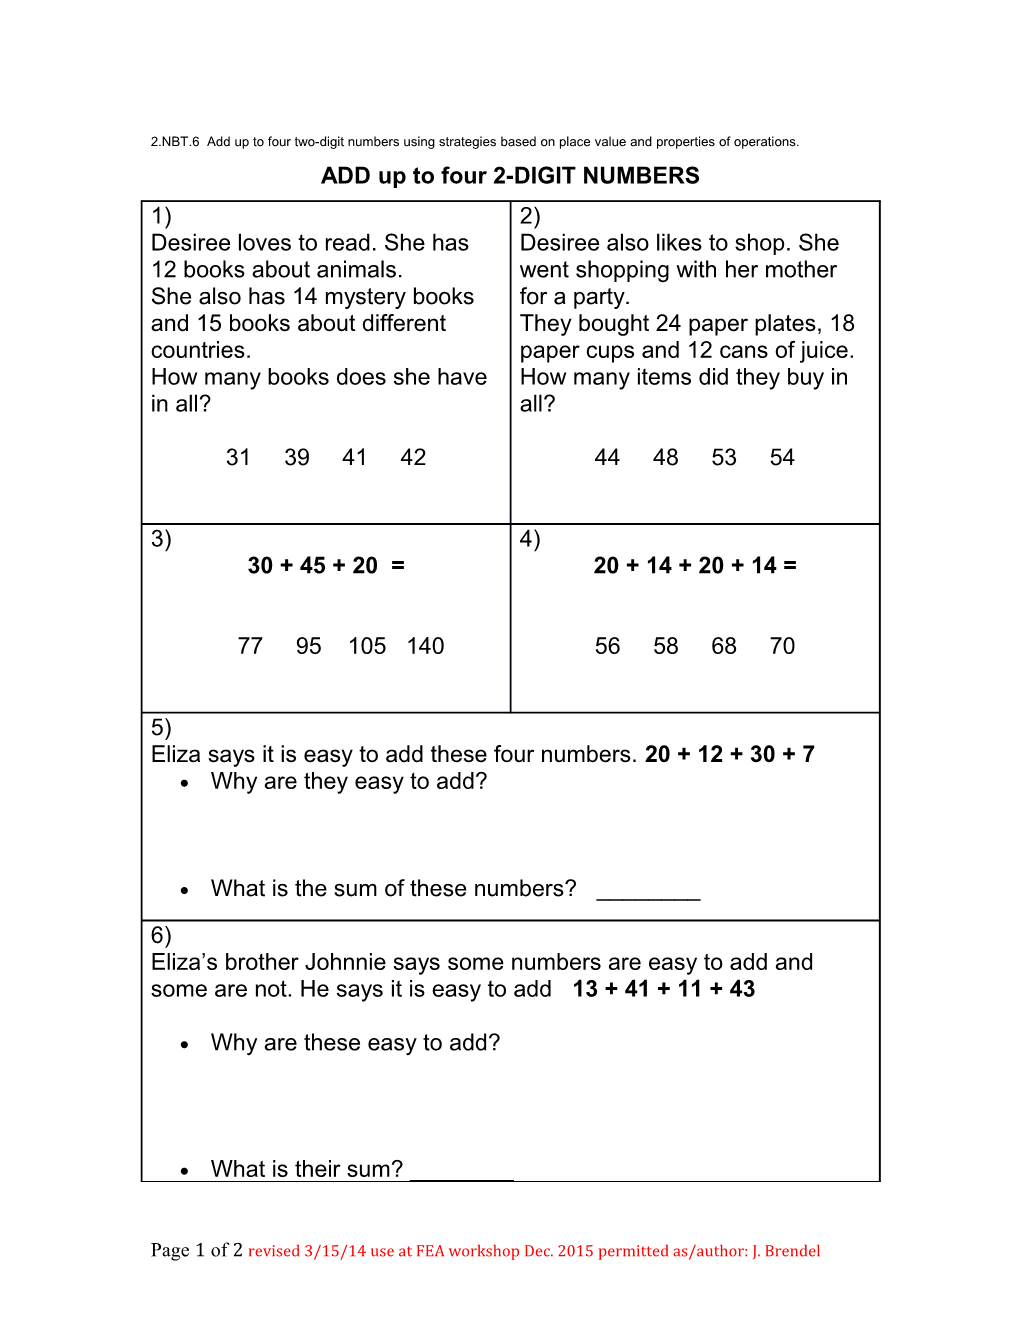 ADD up to Four 2-DIGIT NUMBERS